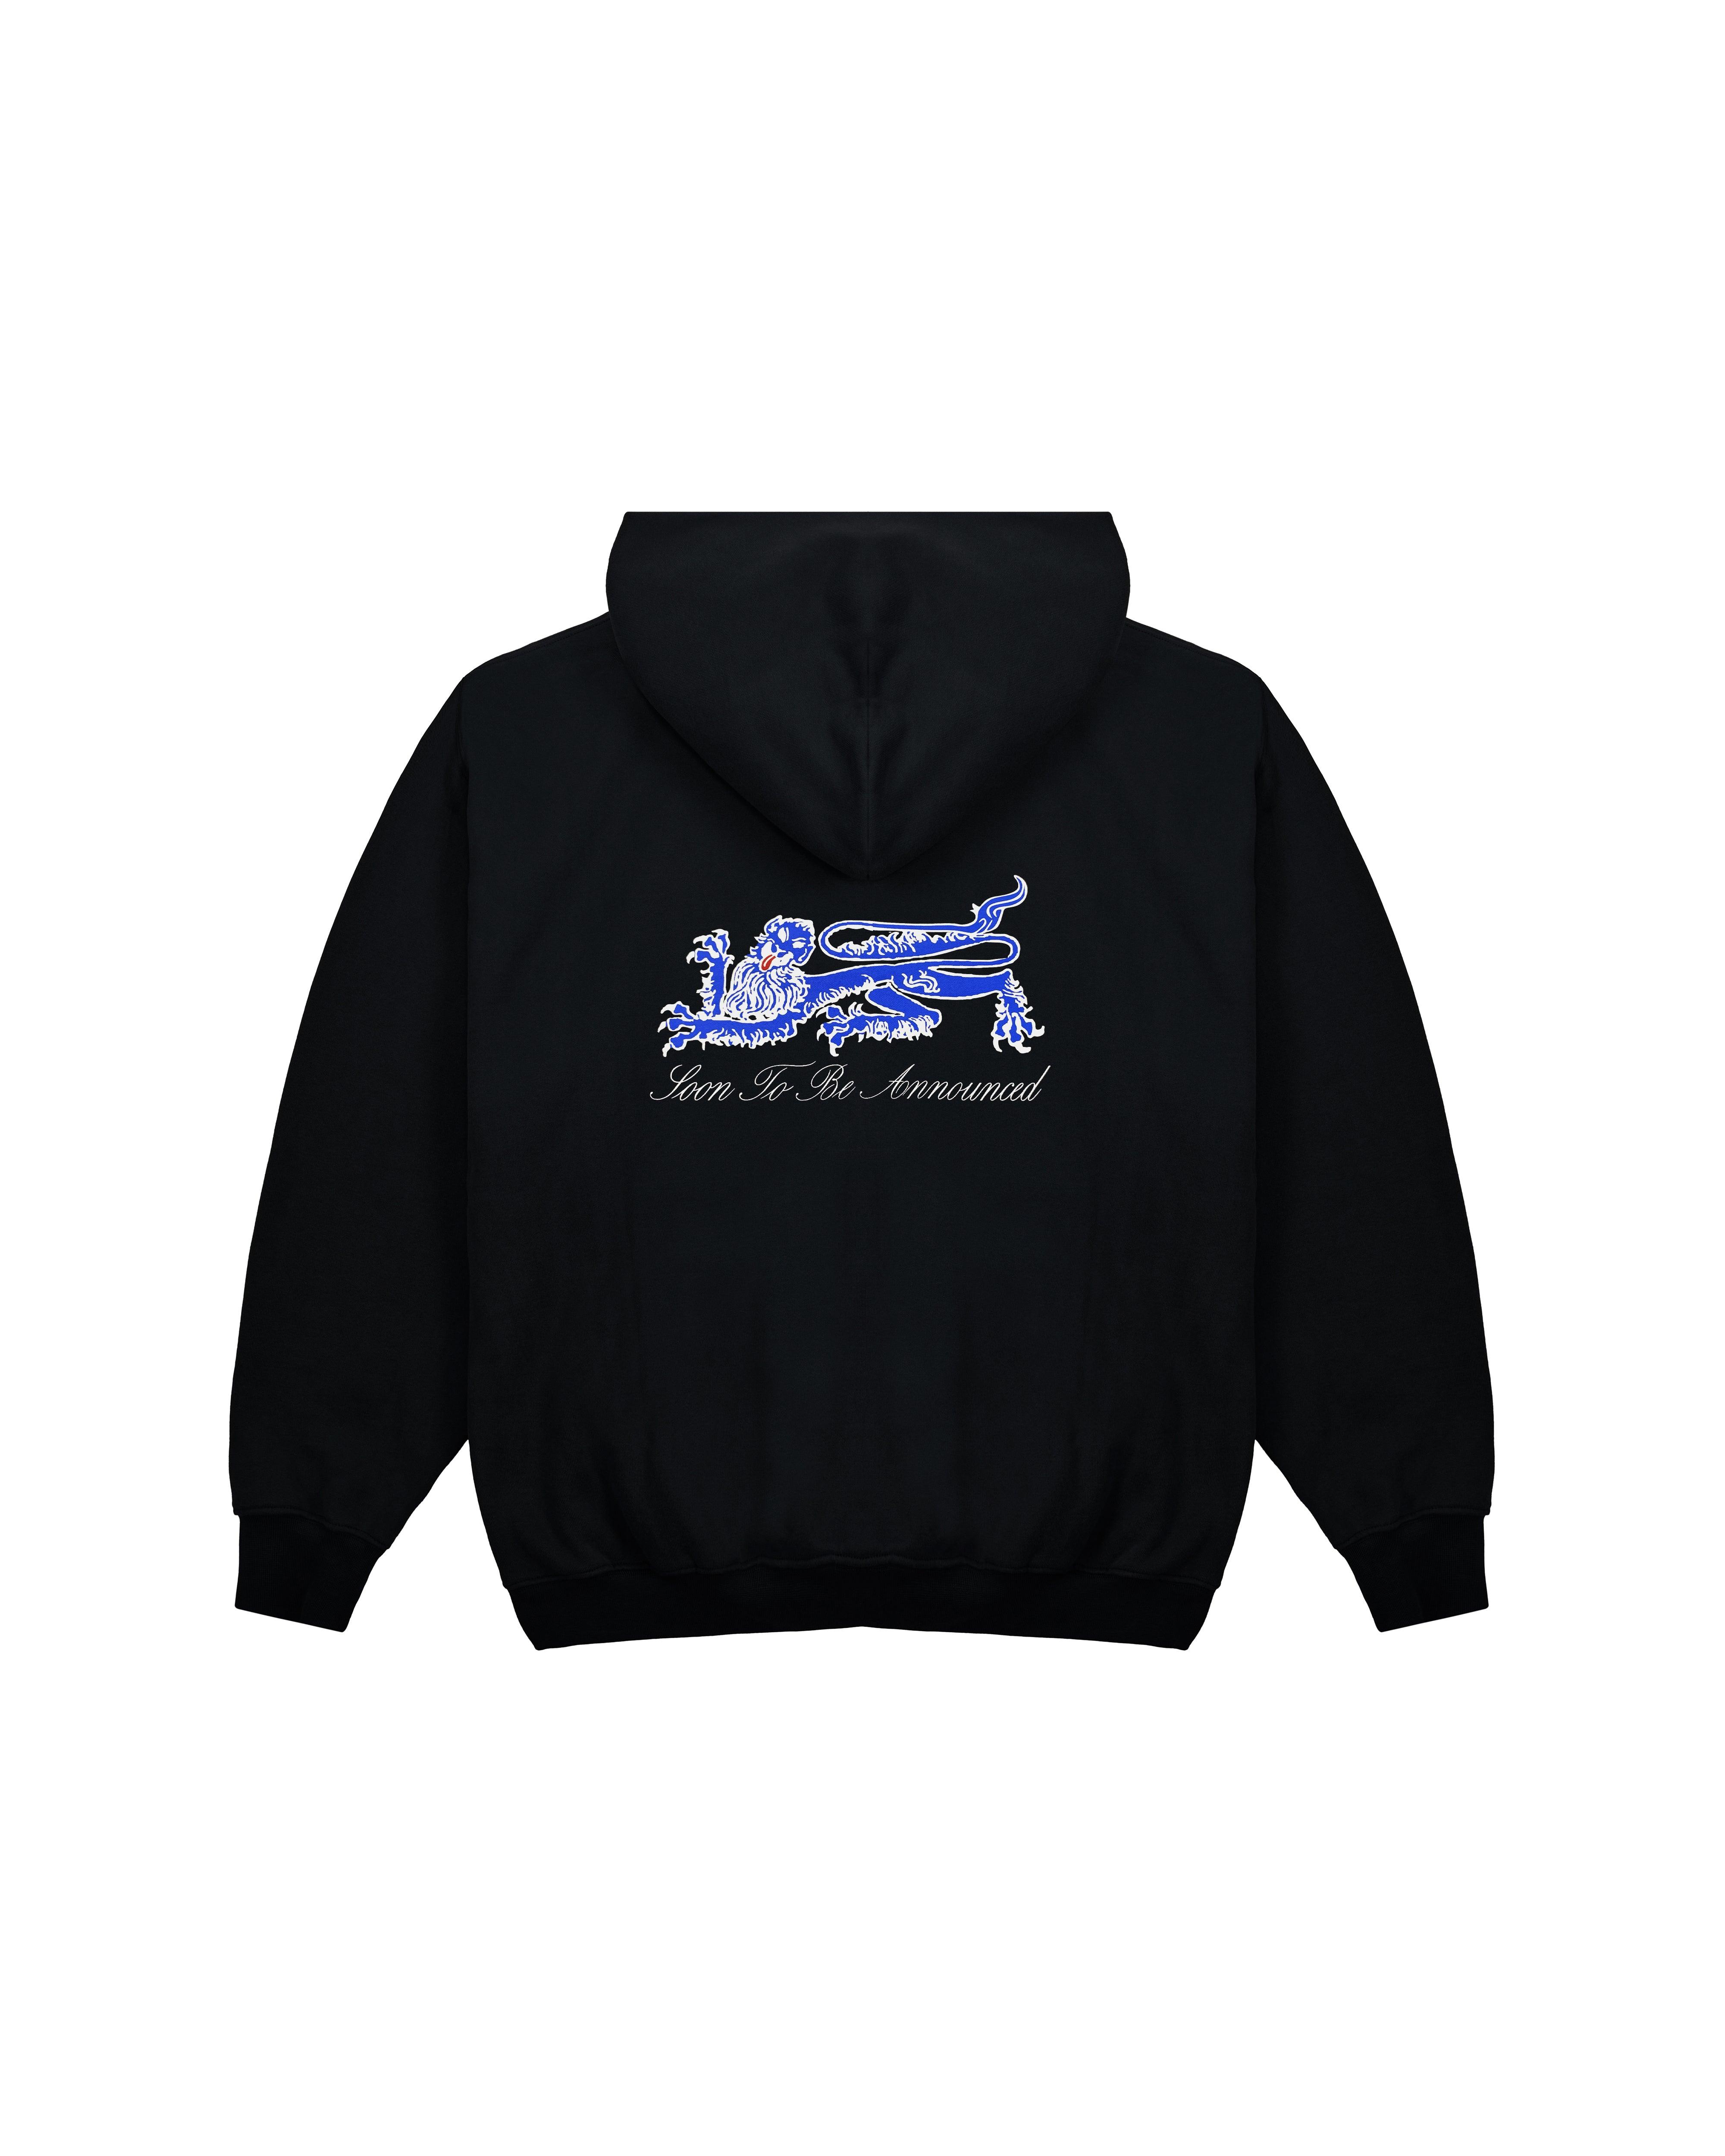 One Lion Hoodie - SOON TO BE ANNOUNCED